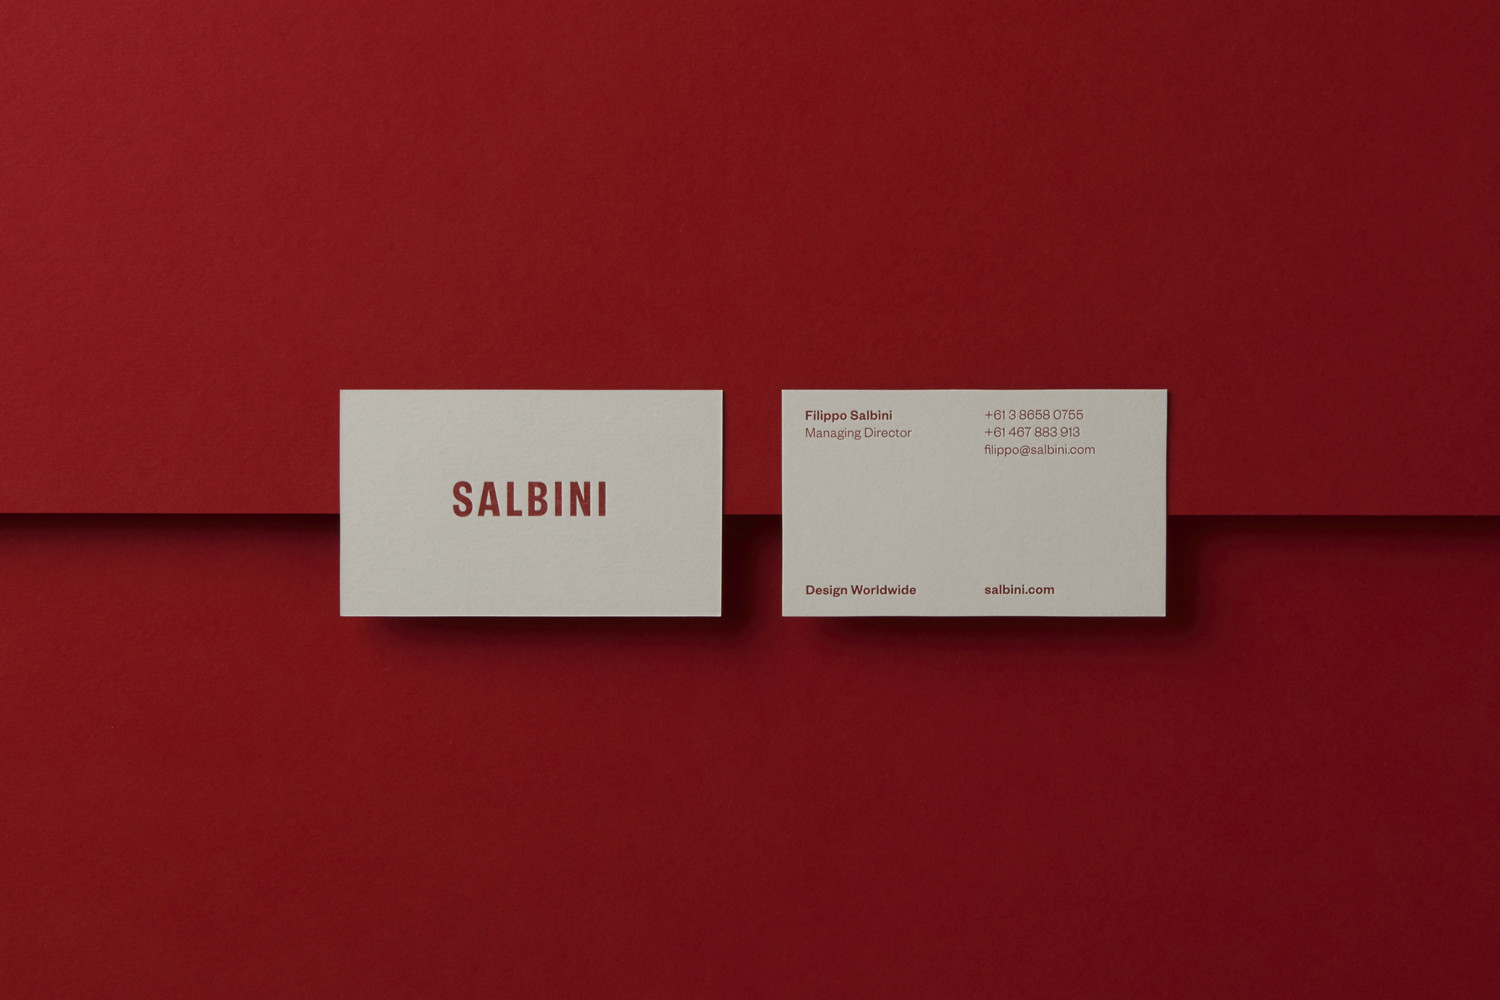 Logotype and letterpress business card by Studio Brave for Italian online furniture retailer Salbini.